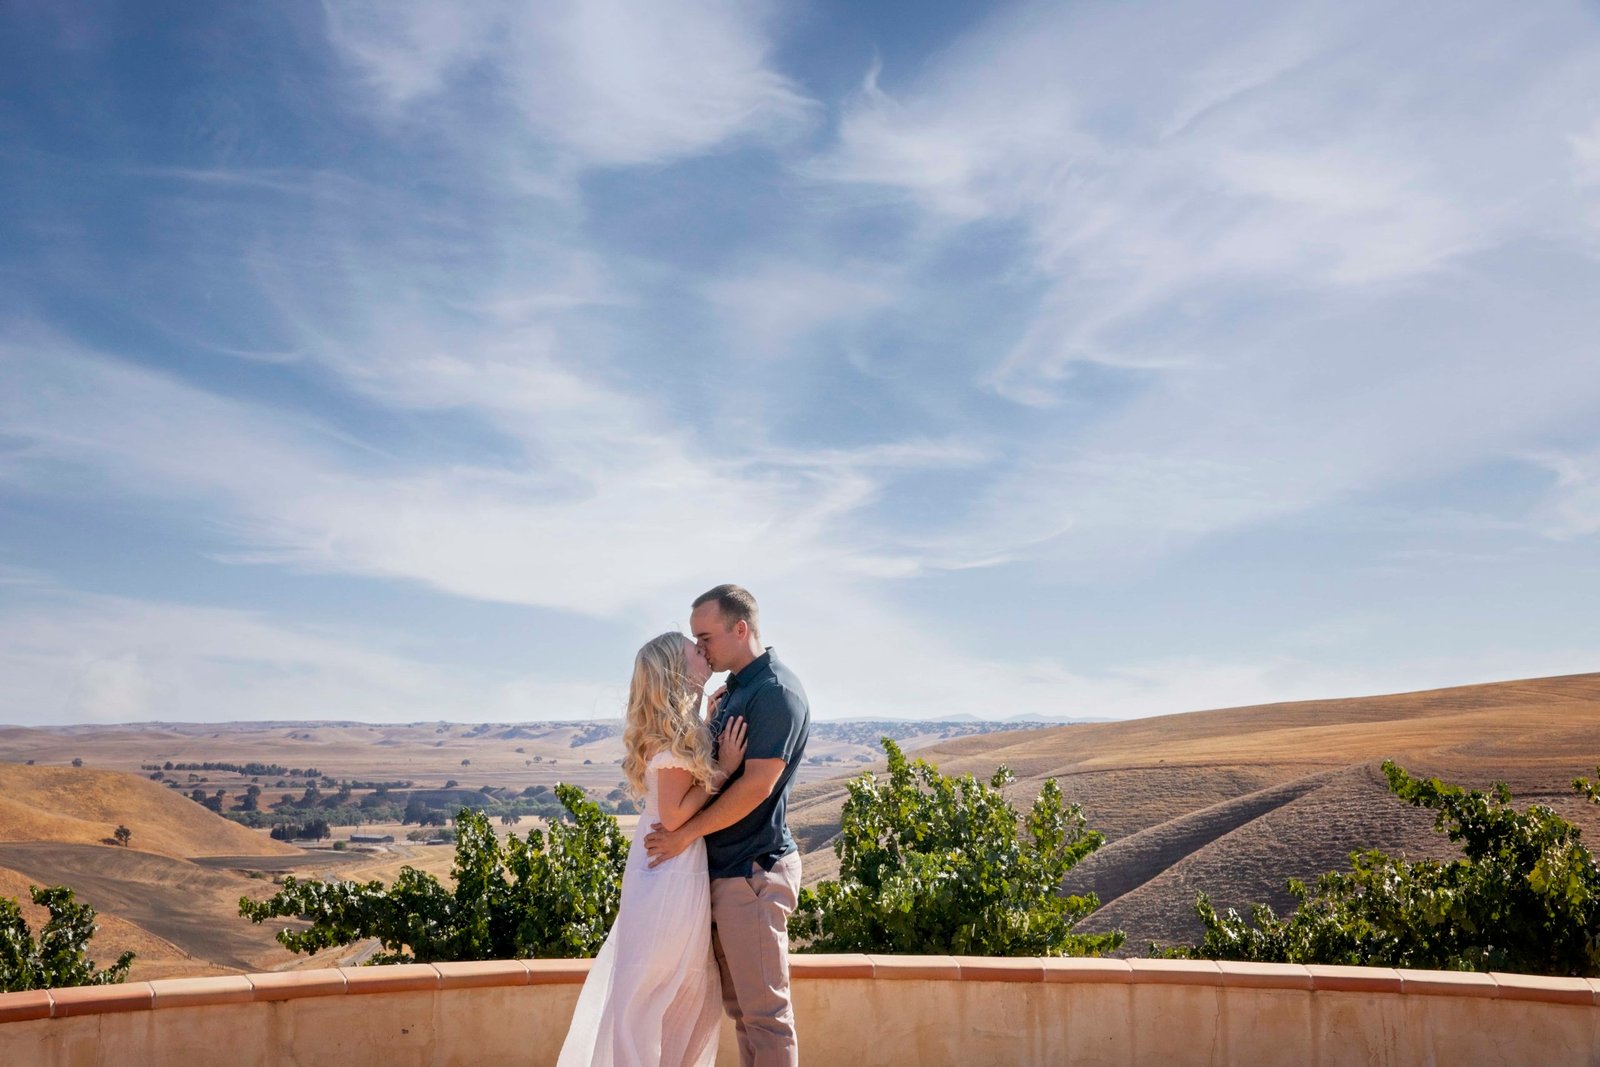 couple kissing with the California hillside and blue skies in the background